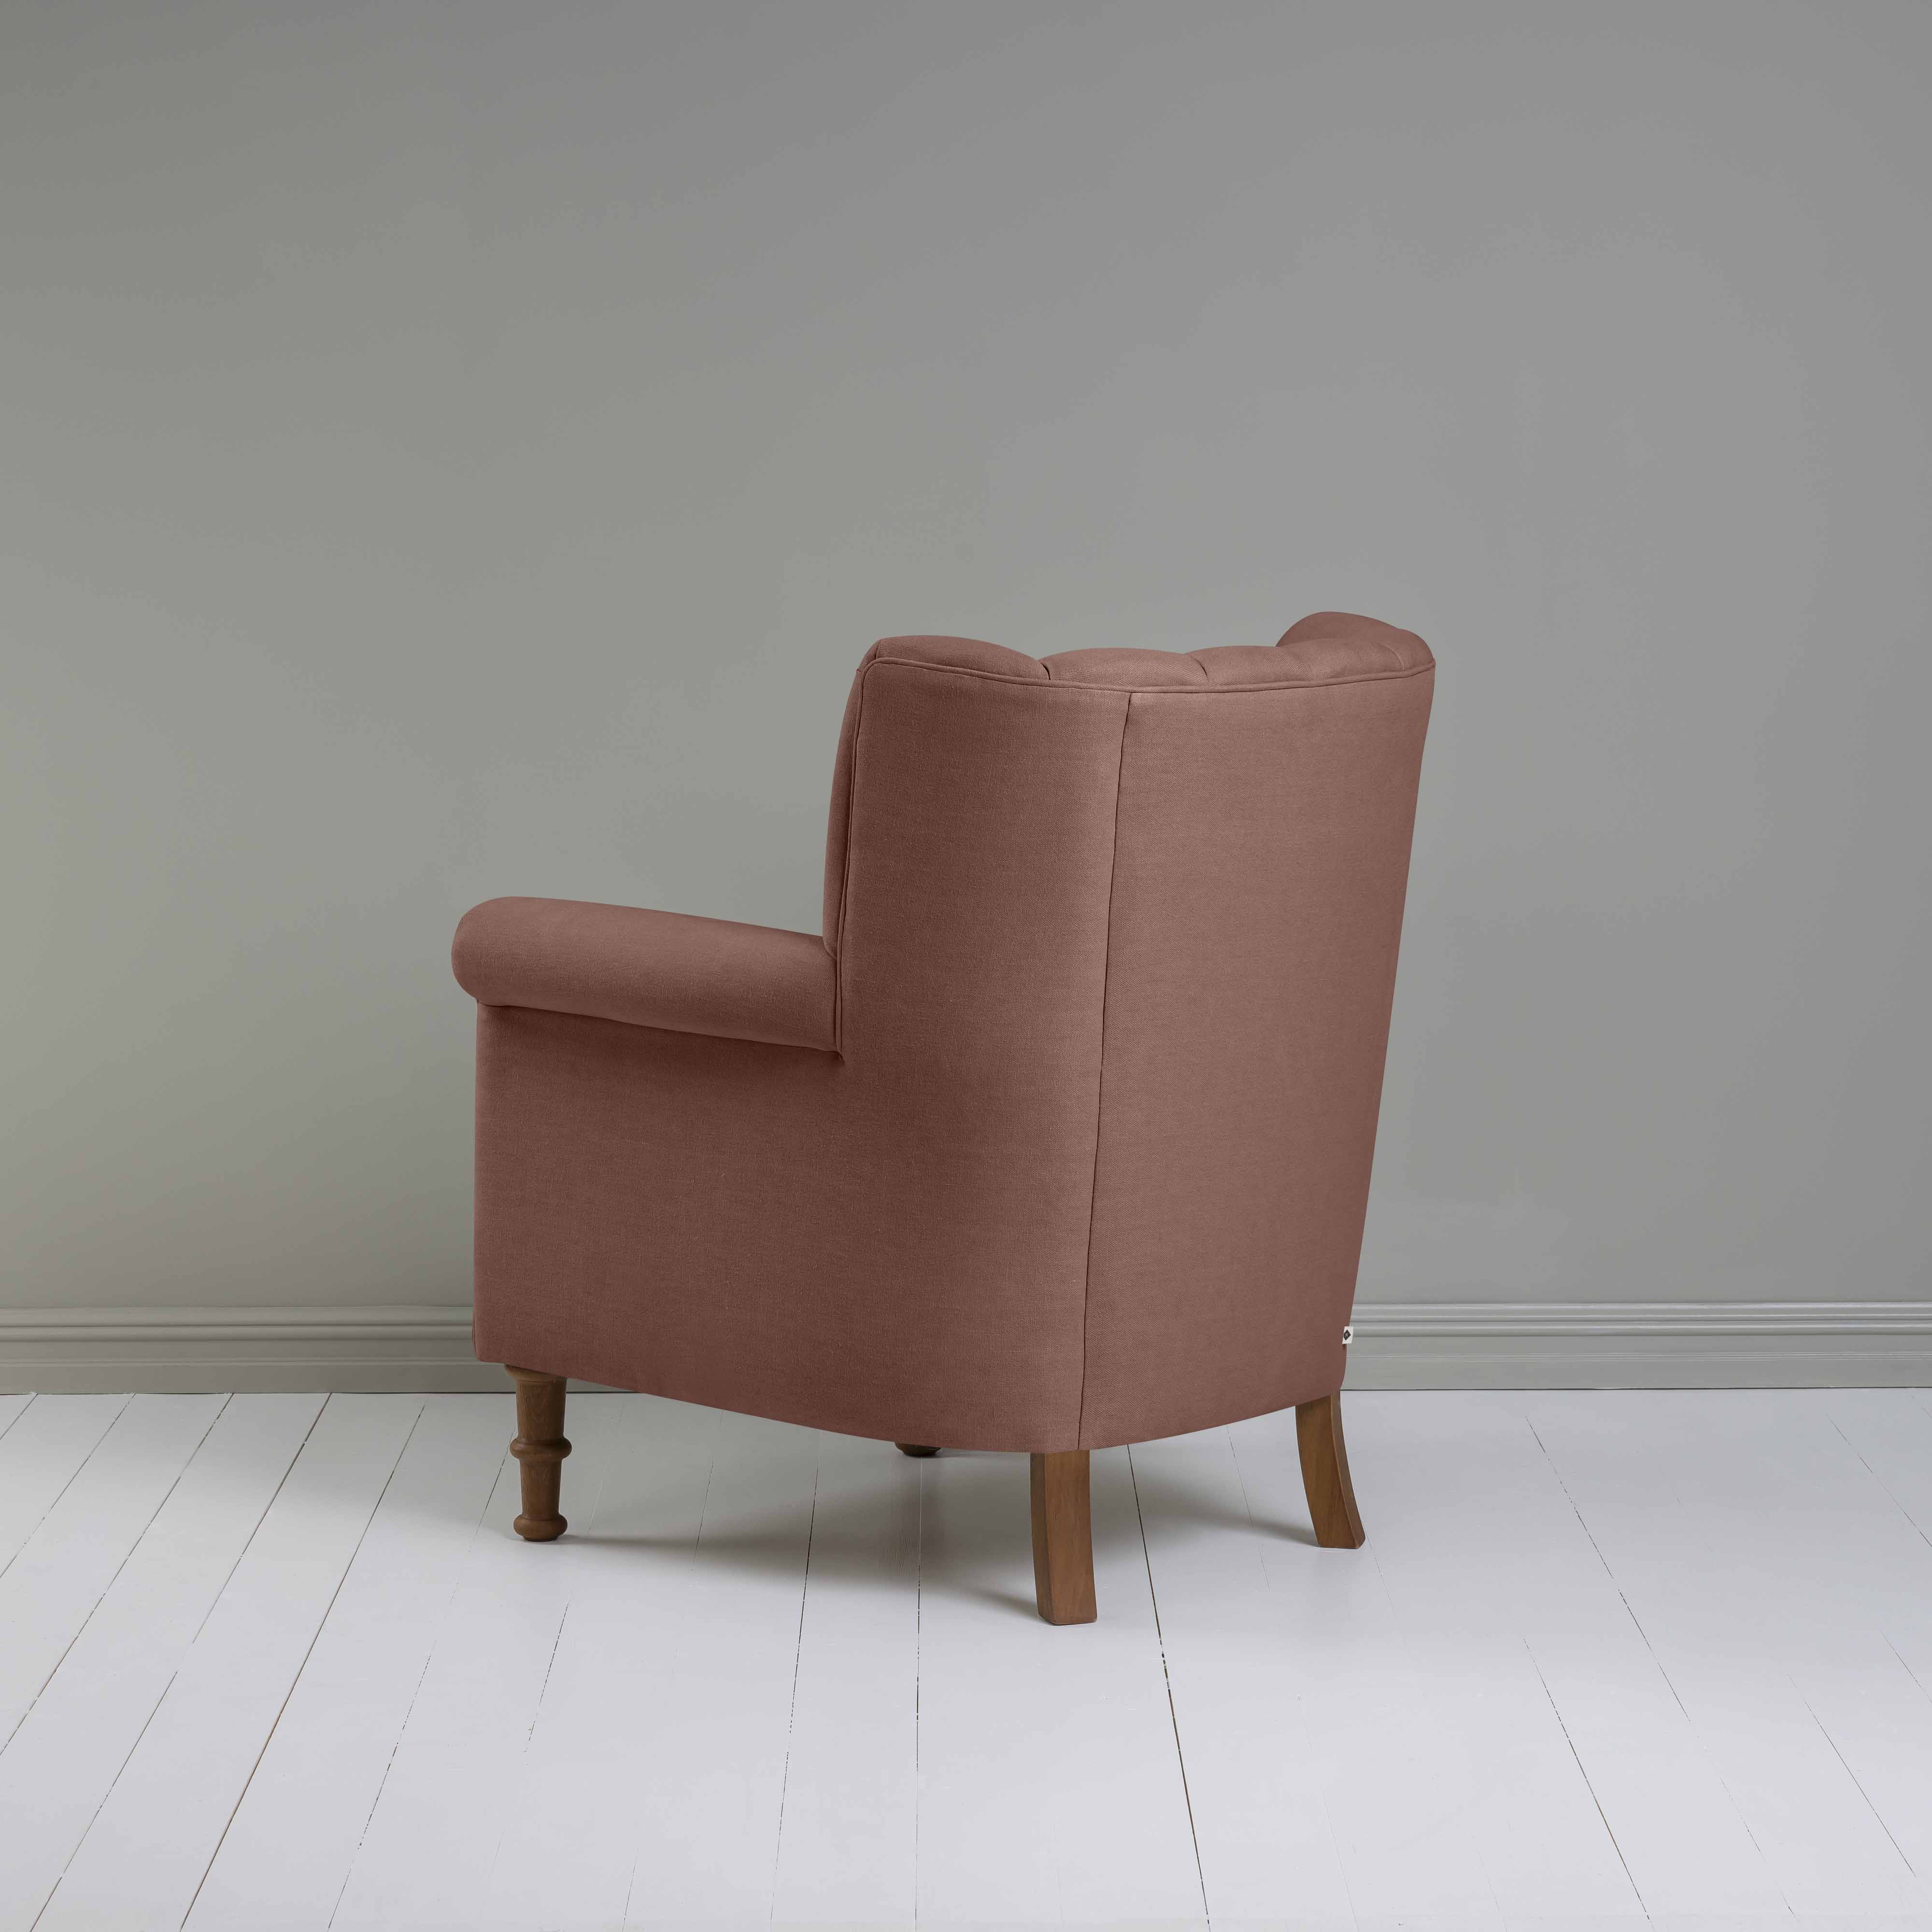  Time Out Armchair in Laidback Linen Sweet Briar 